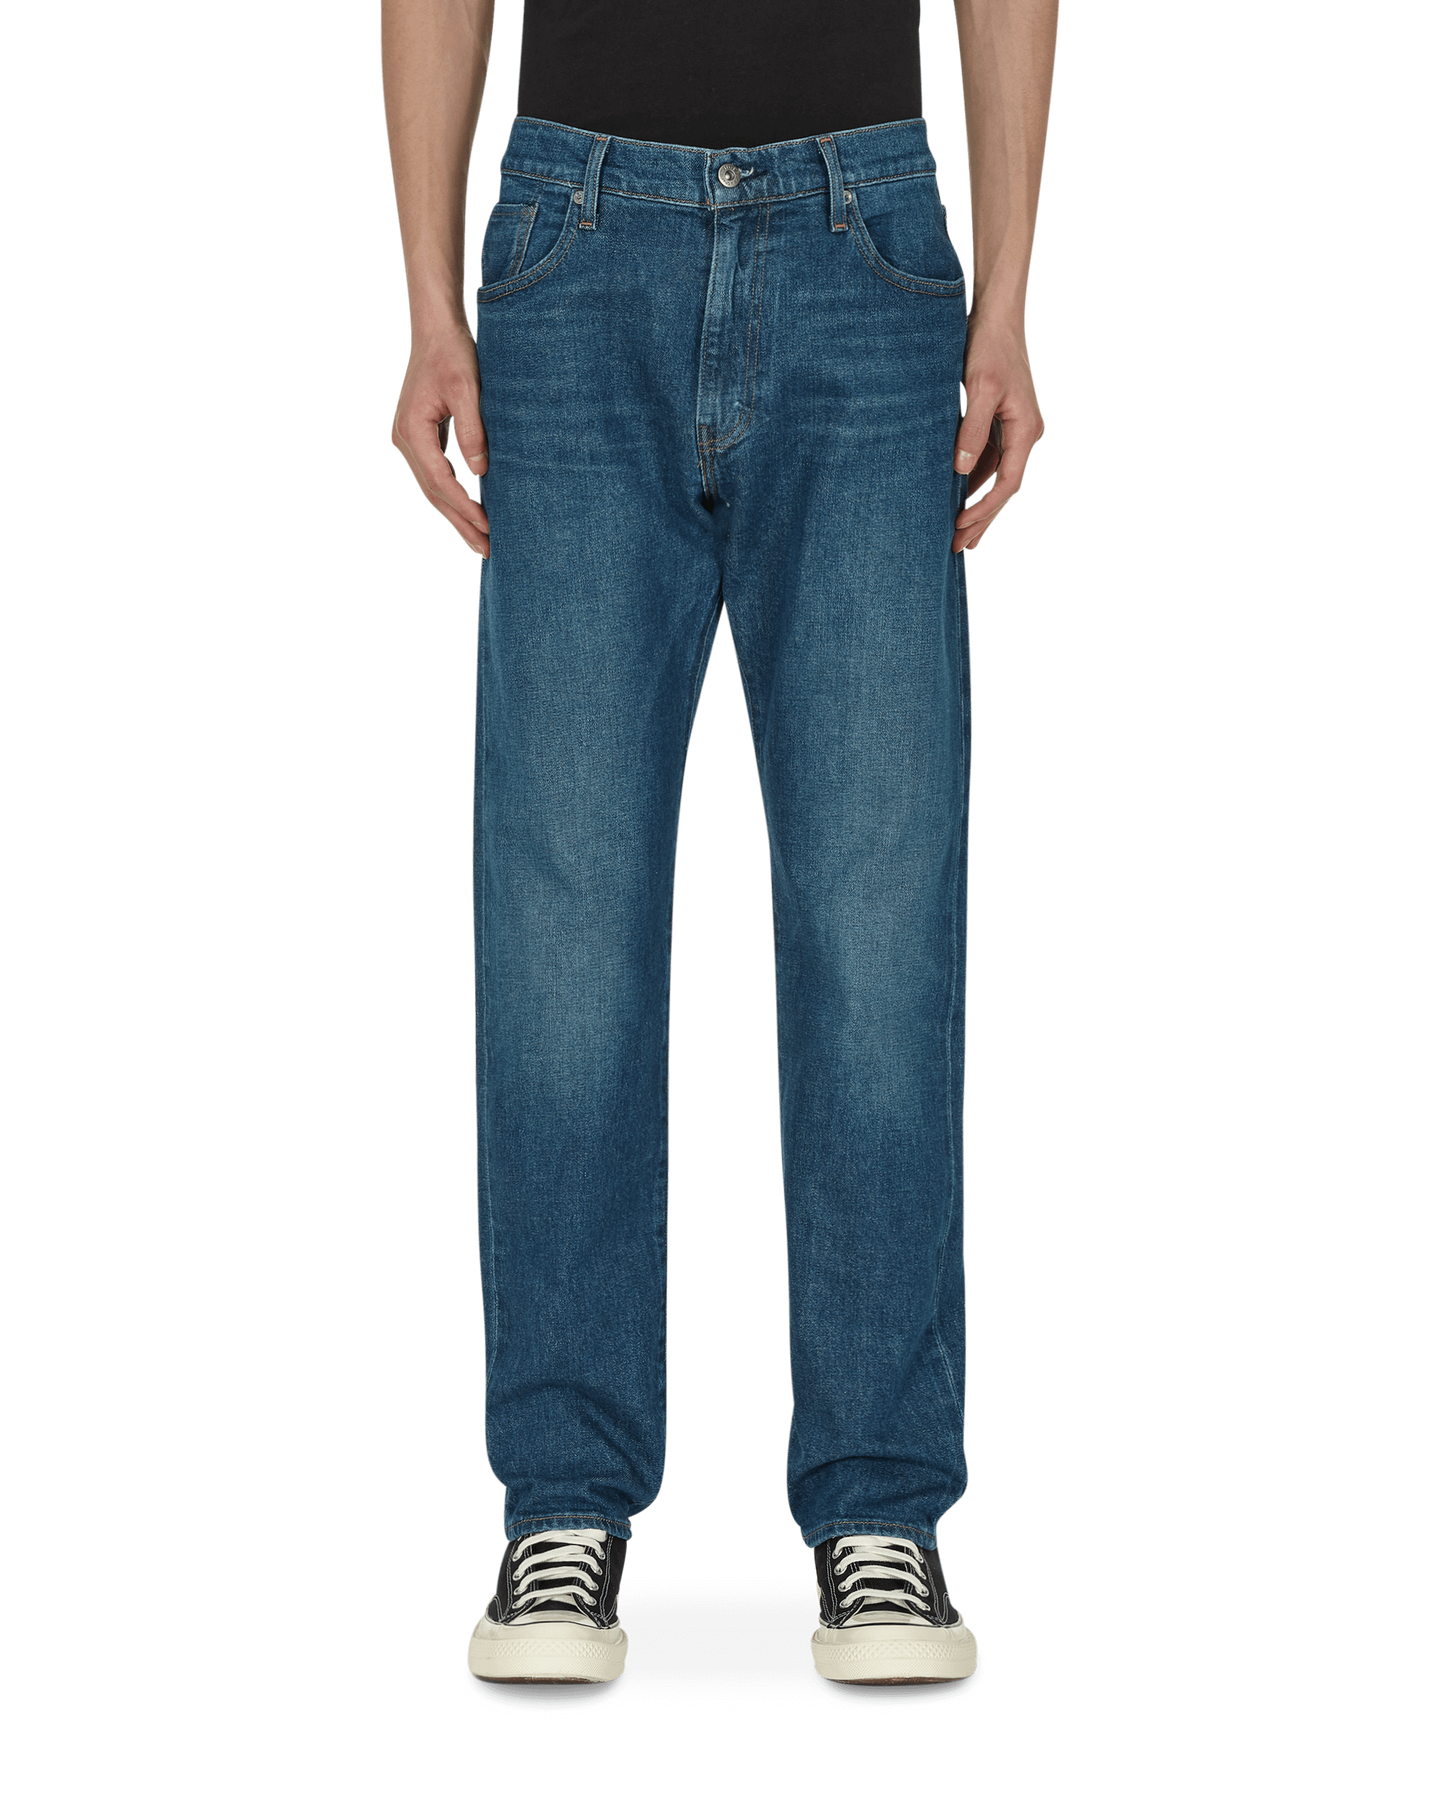 Levi's Made & Crafted Lmc 551Z Straight Fit Blue Pants Denim 17599 0011